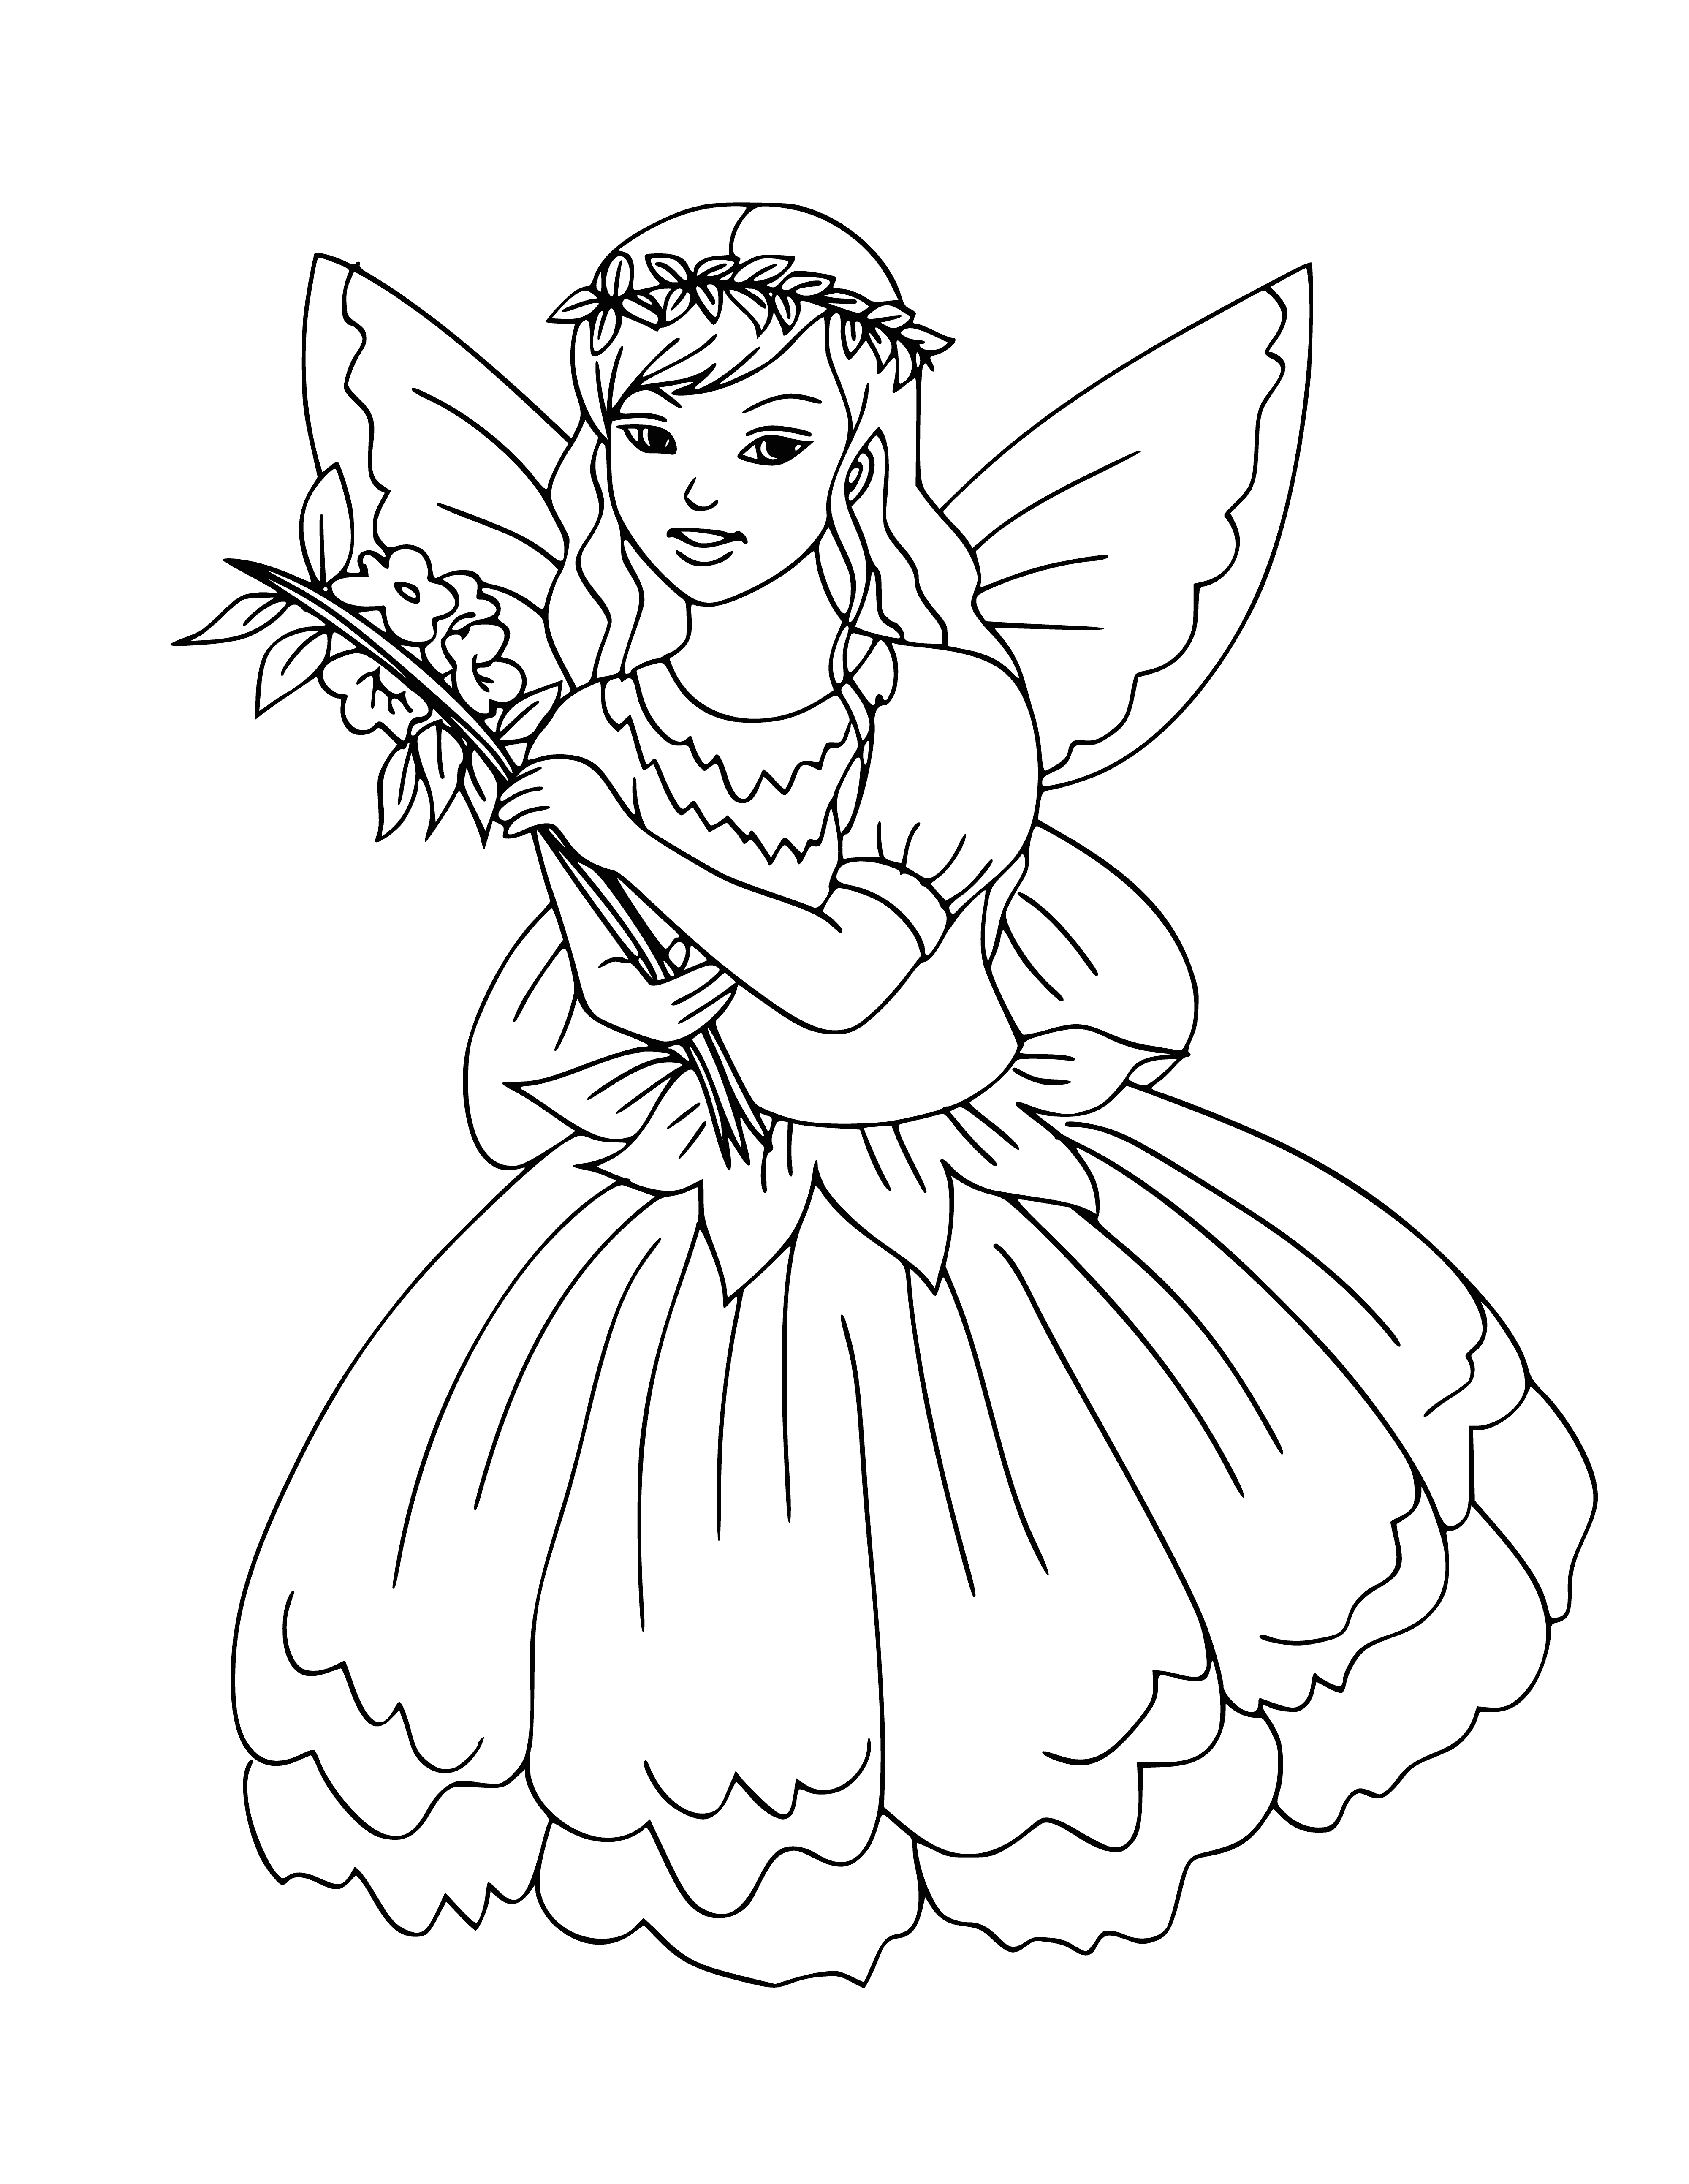 coloring page: Fairy sits in leafy wreath; leaves green; fairy has wings. #coloringpage